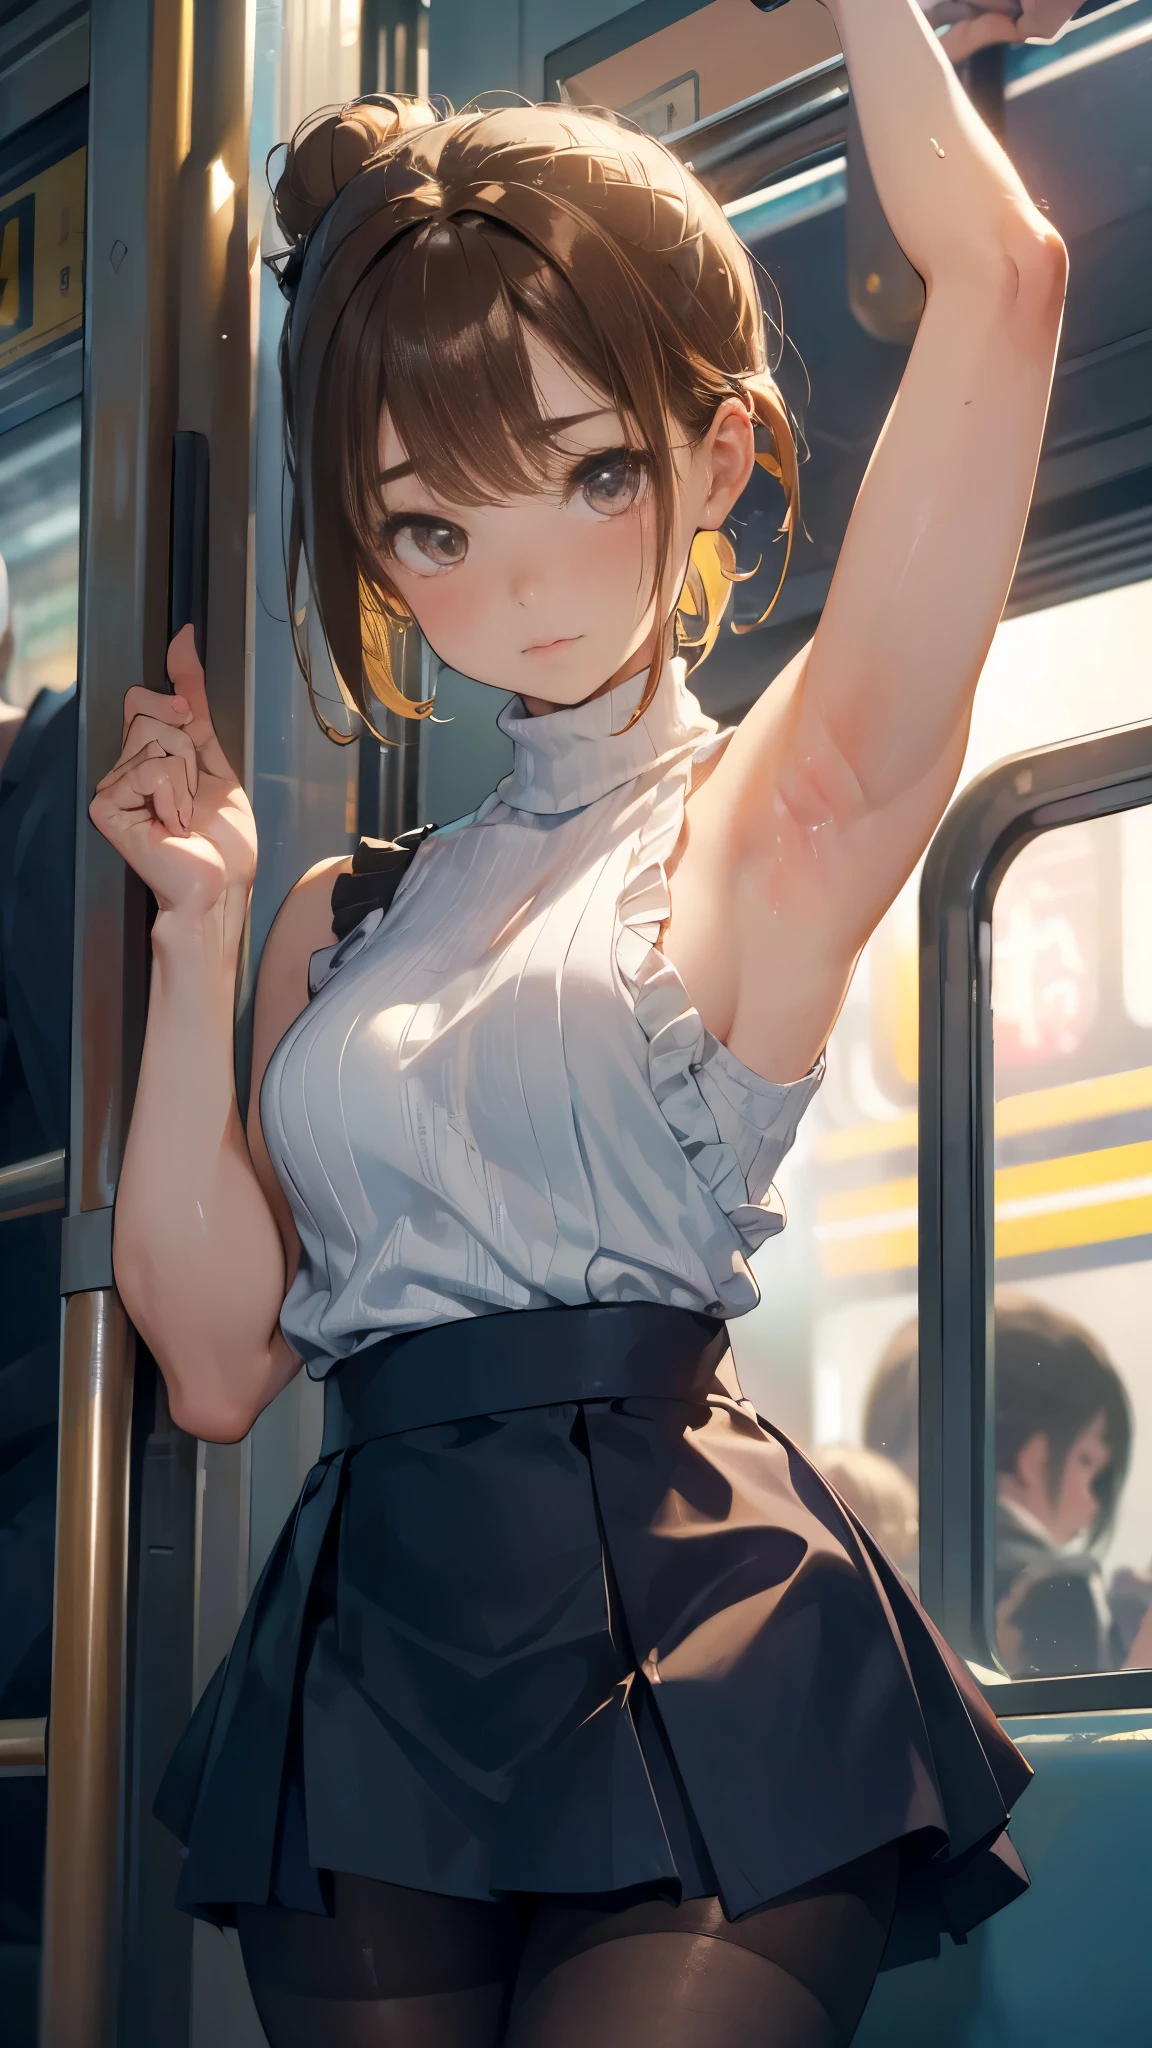 nsfw, best picture quality, 8K, high quality, masterpiece:1.2), ((masterpiece)), (high detail, high quality, best picture quality), bokeh, DOF, Portrait, open stance, (photo realistic:1.4), real skin texture, A sleeveless navy turtleneck knit, frilled tight skirt, short hair, pantyhose, (holding on to the train's suspension leathers:1.5) on a (crowded subway train), (her armpits fully visible:1.4), extremely cute, very round face, brown hair, plump body, shoot from below, looking aside, (blond yellow hair), bun style hair, crying, embarrassed, short height, small head and face, watched by crowd